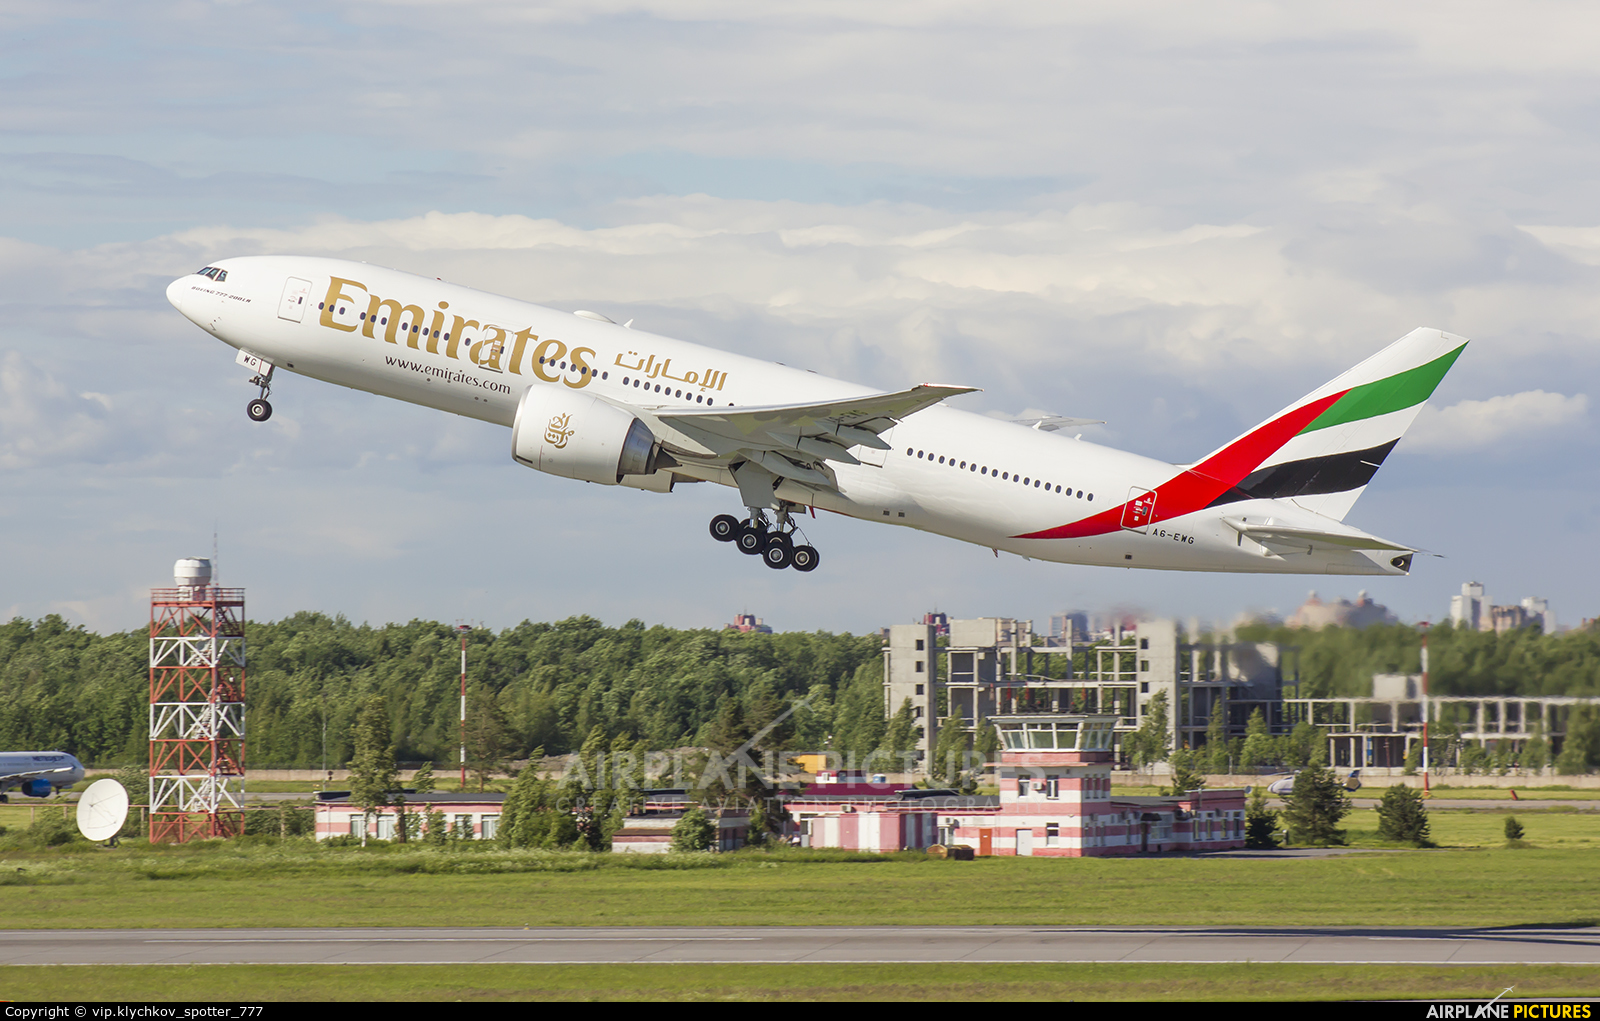 Emirates Airlines A6-EWG aircraft at St. Petersburg - Pulkovo